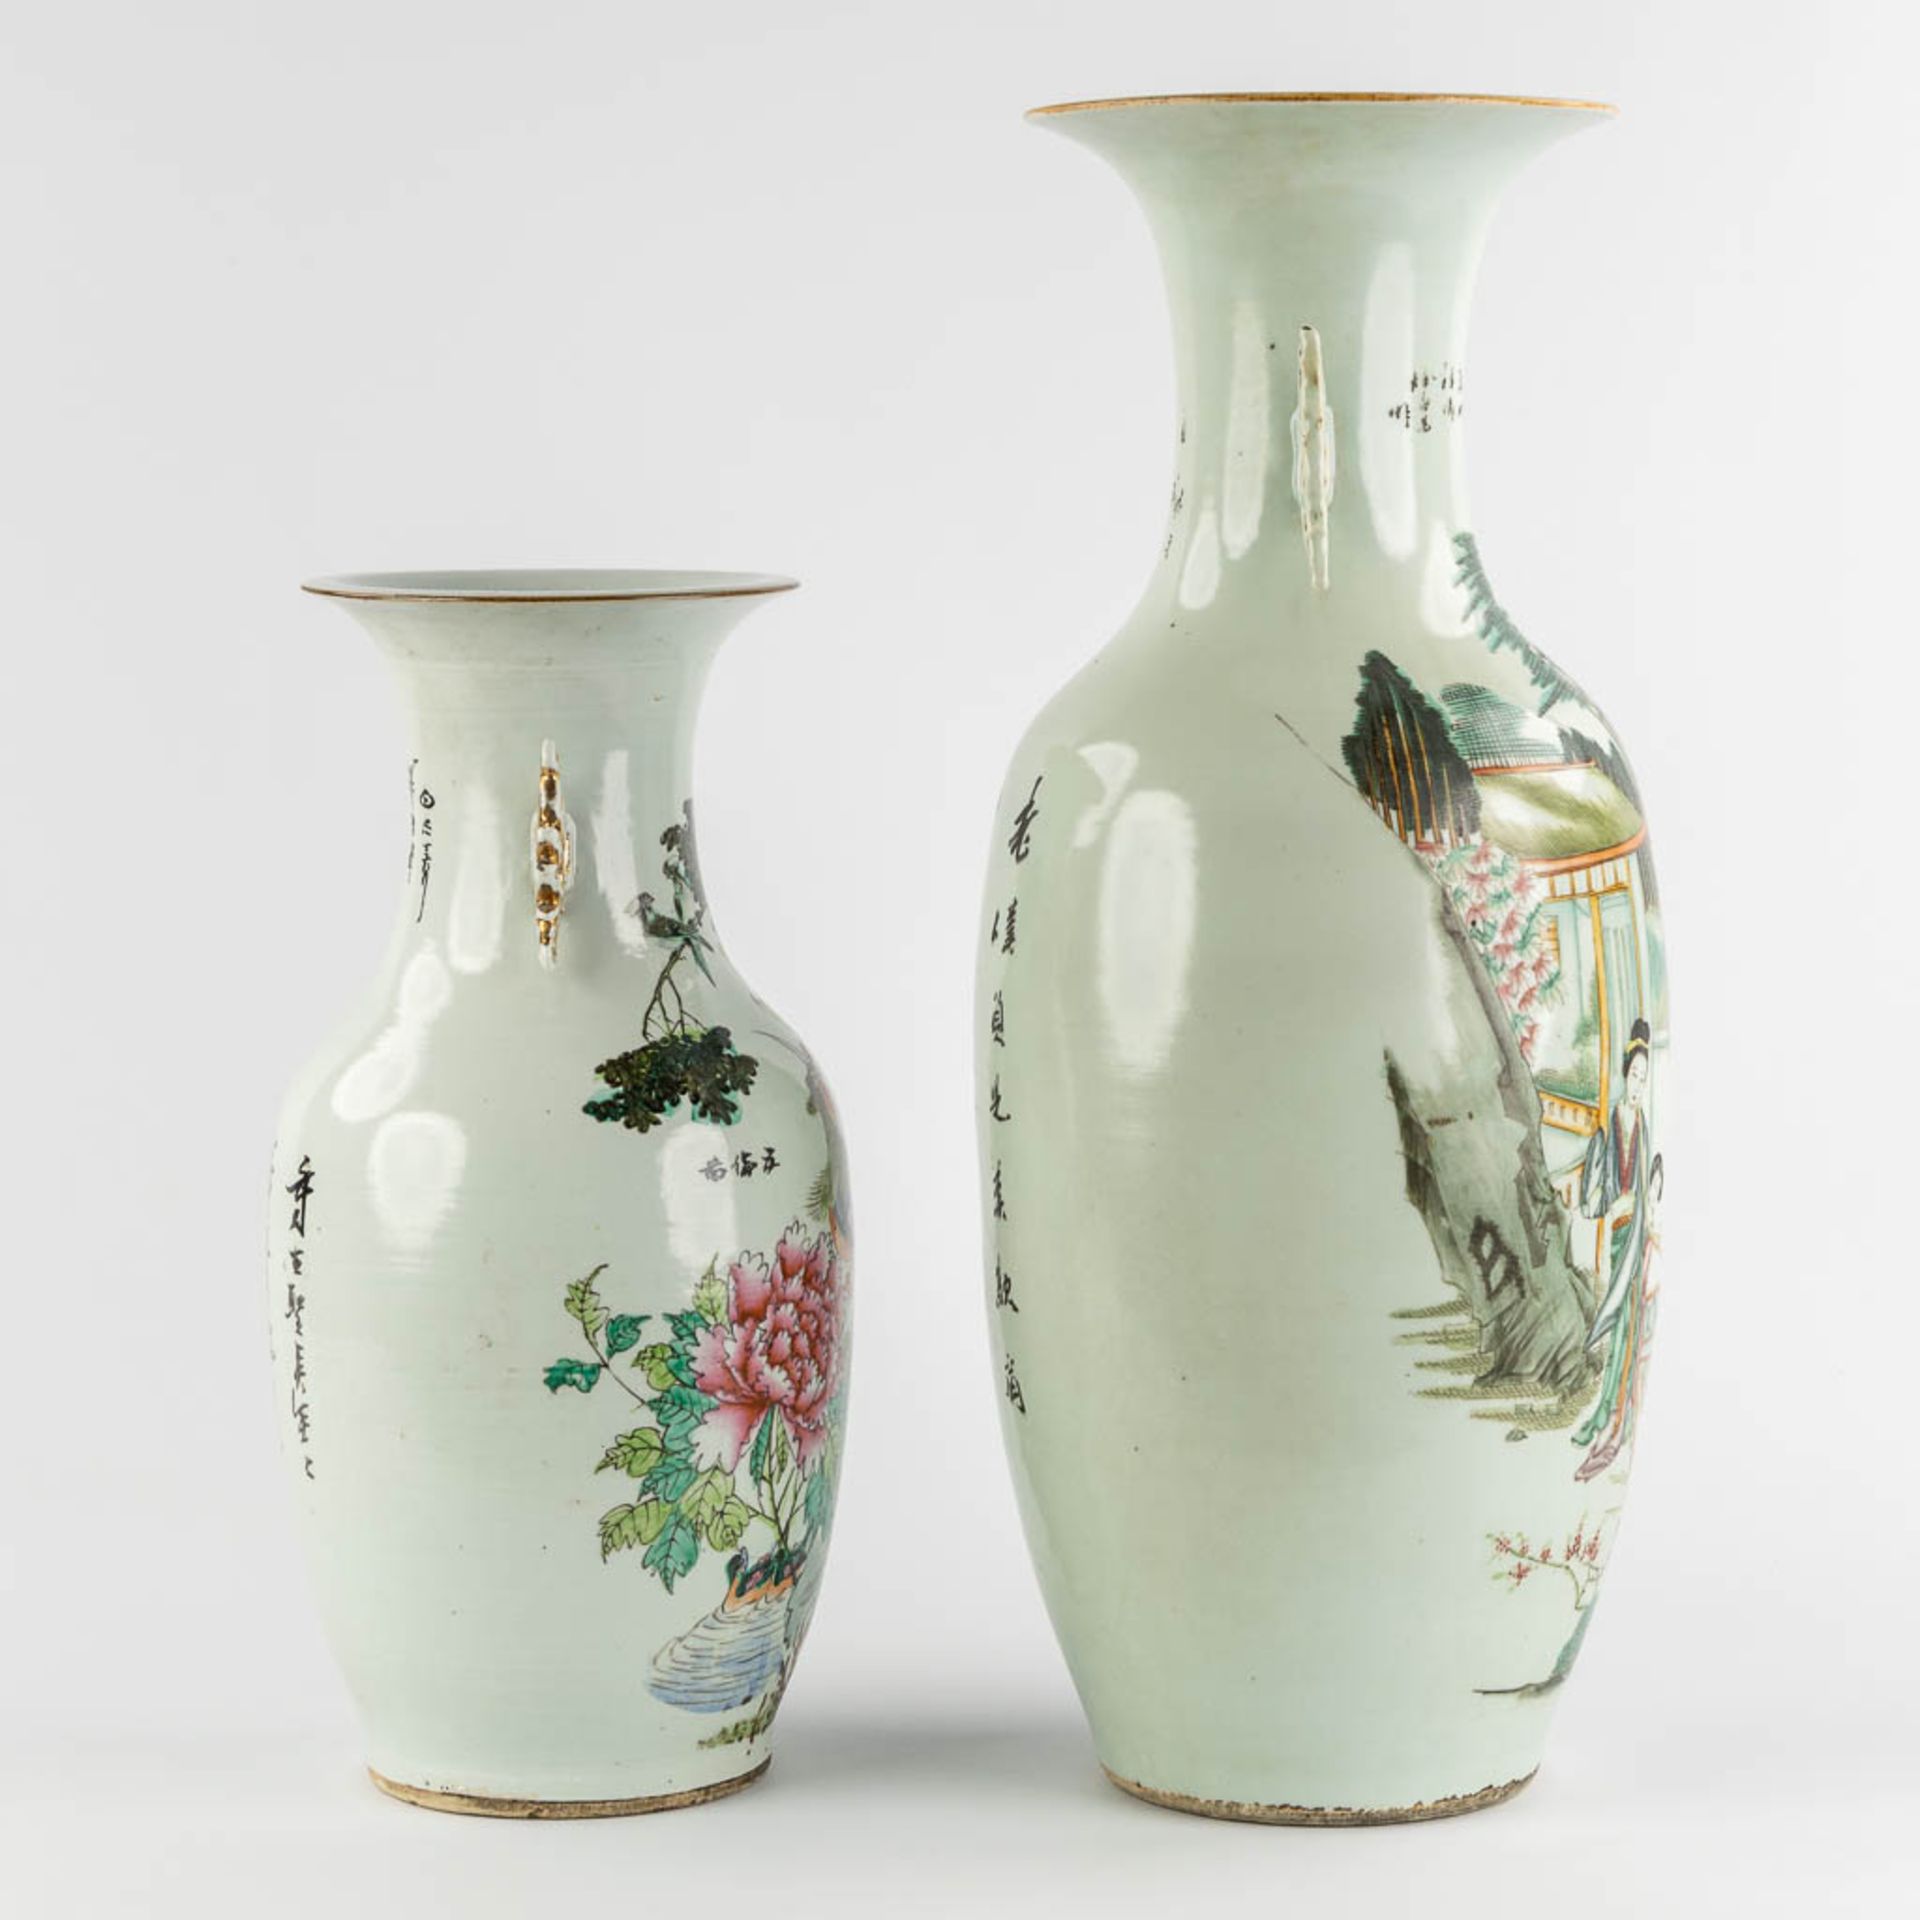 Two Chinese Famille Rose vases decorated with figurines. 19th/20th C. (H:58 x D:23 cm) - Image 6 of 15